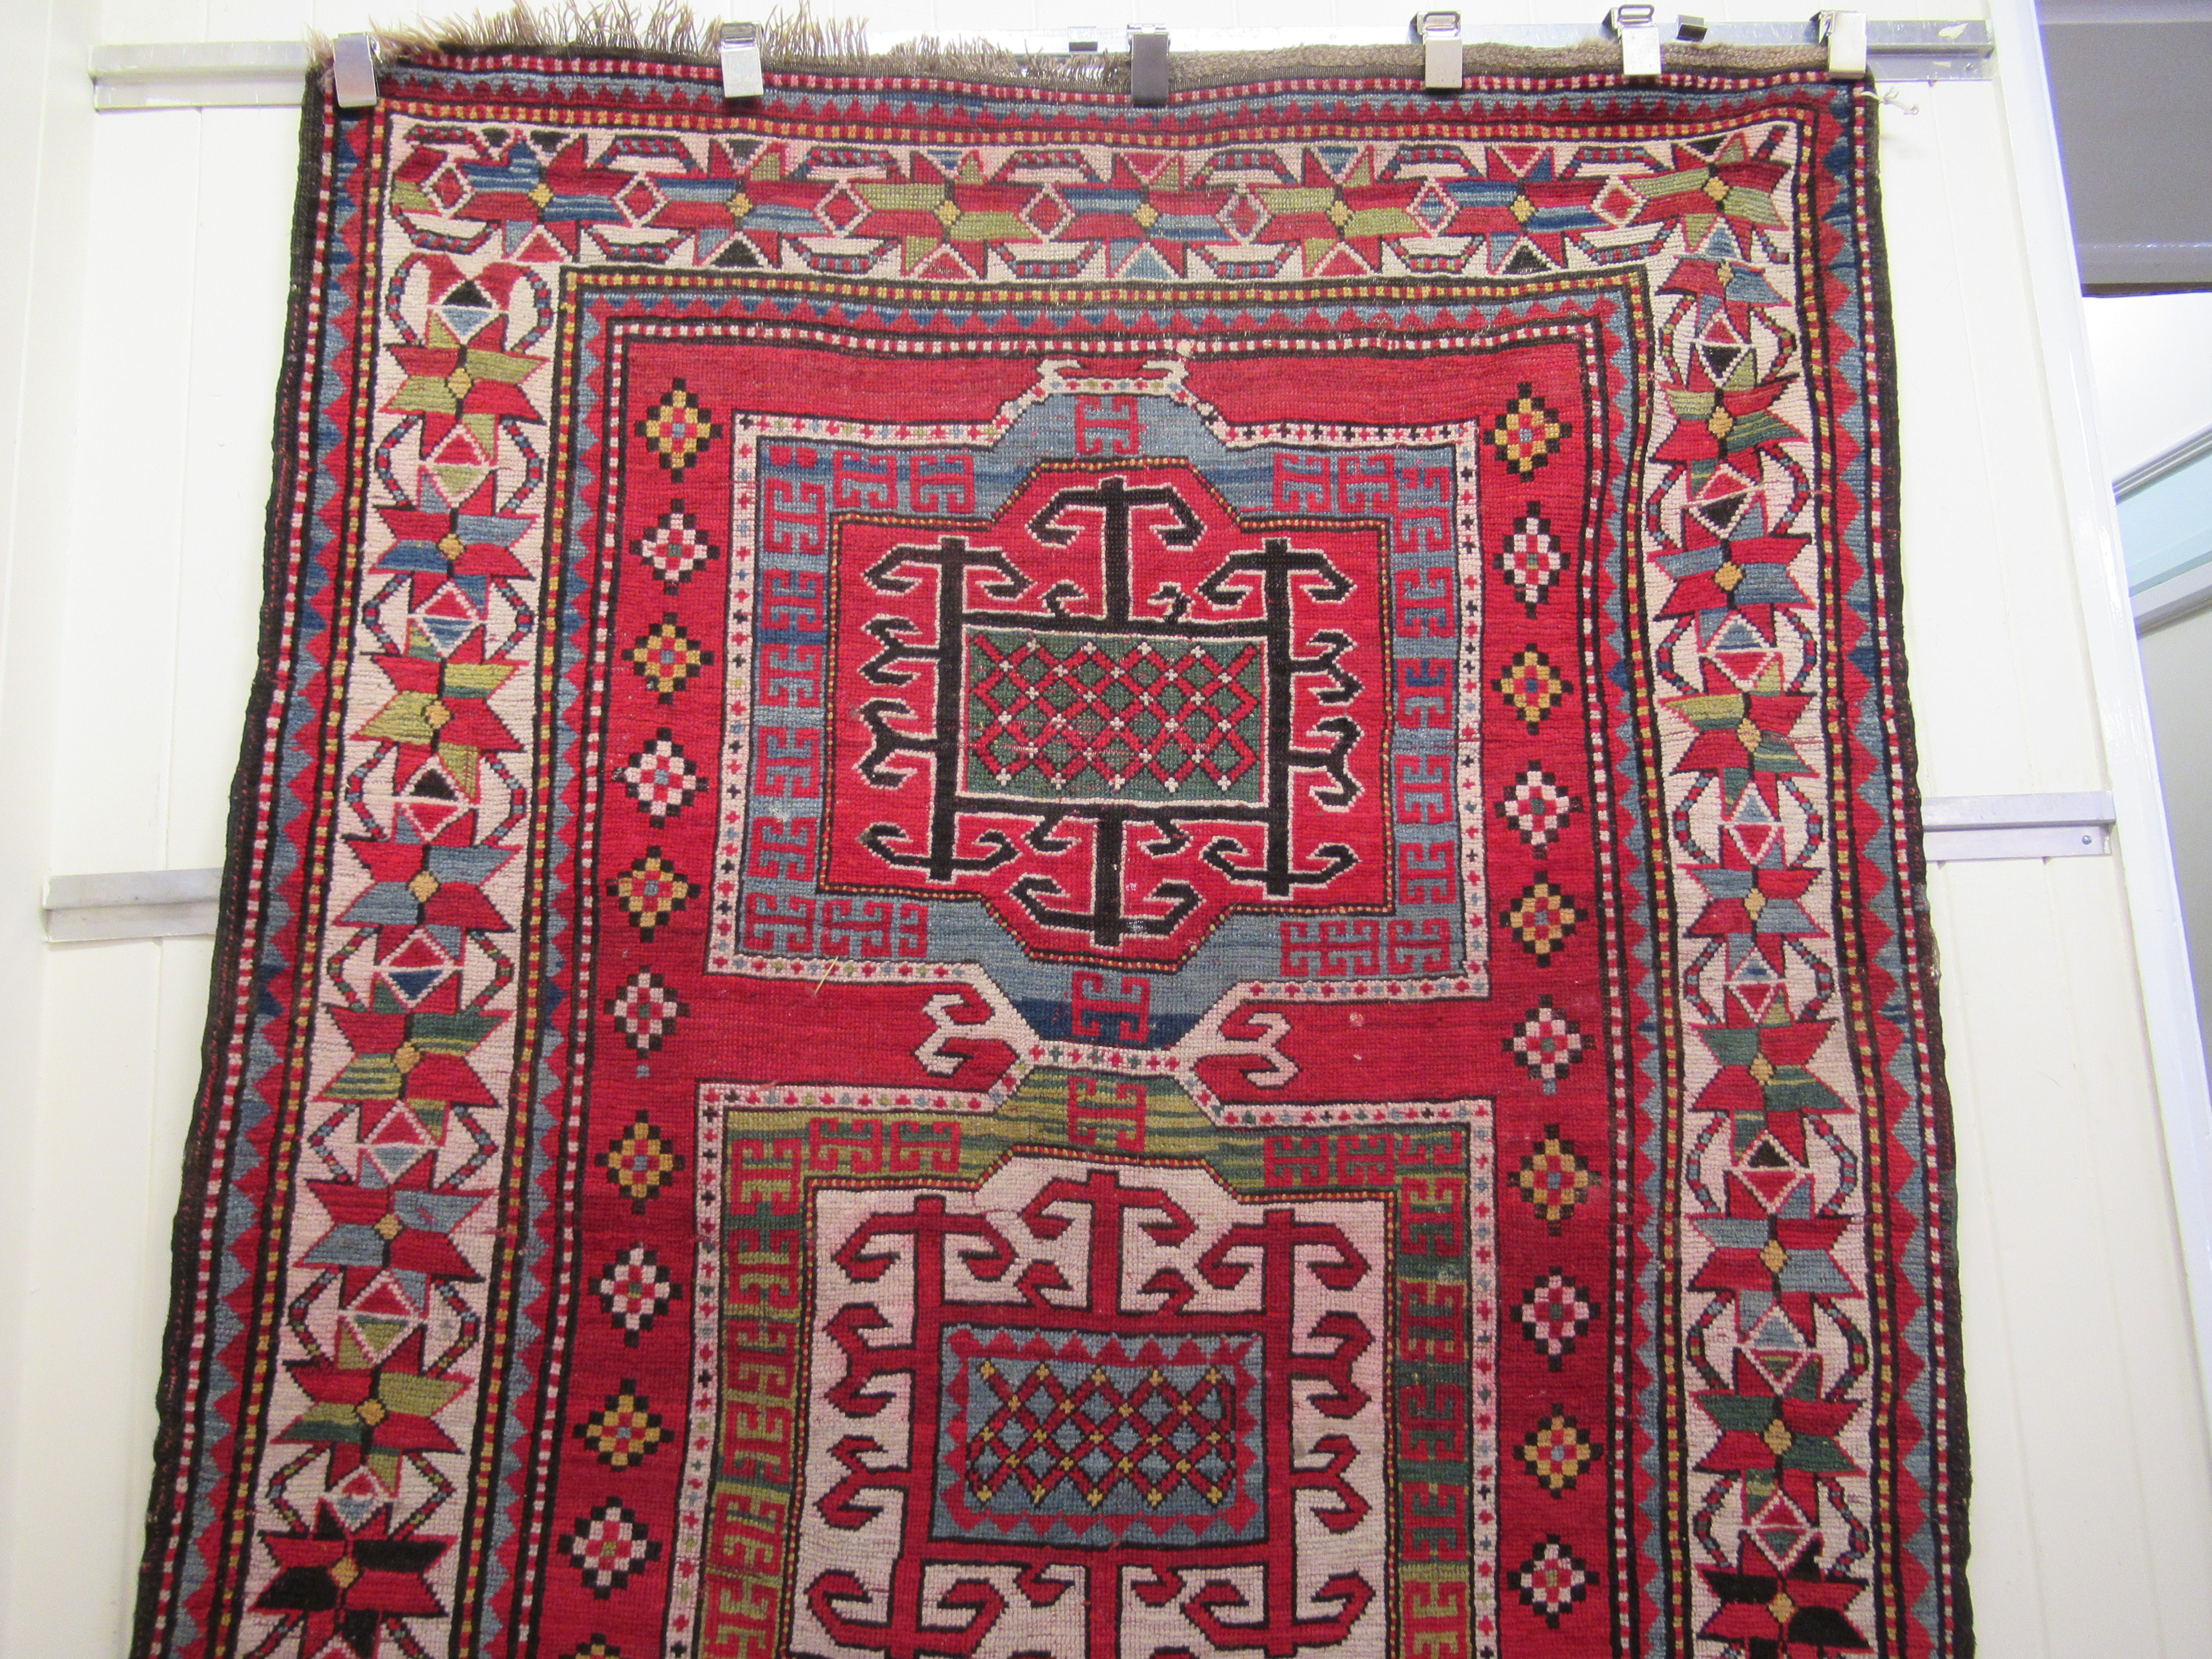 An Afghan Kazak rug, decorated with repeating geometric designs, on a cream ground  52" x 94" - Image 3 of 4